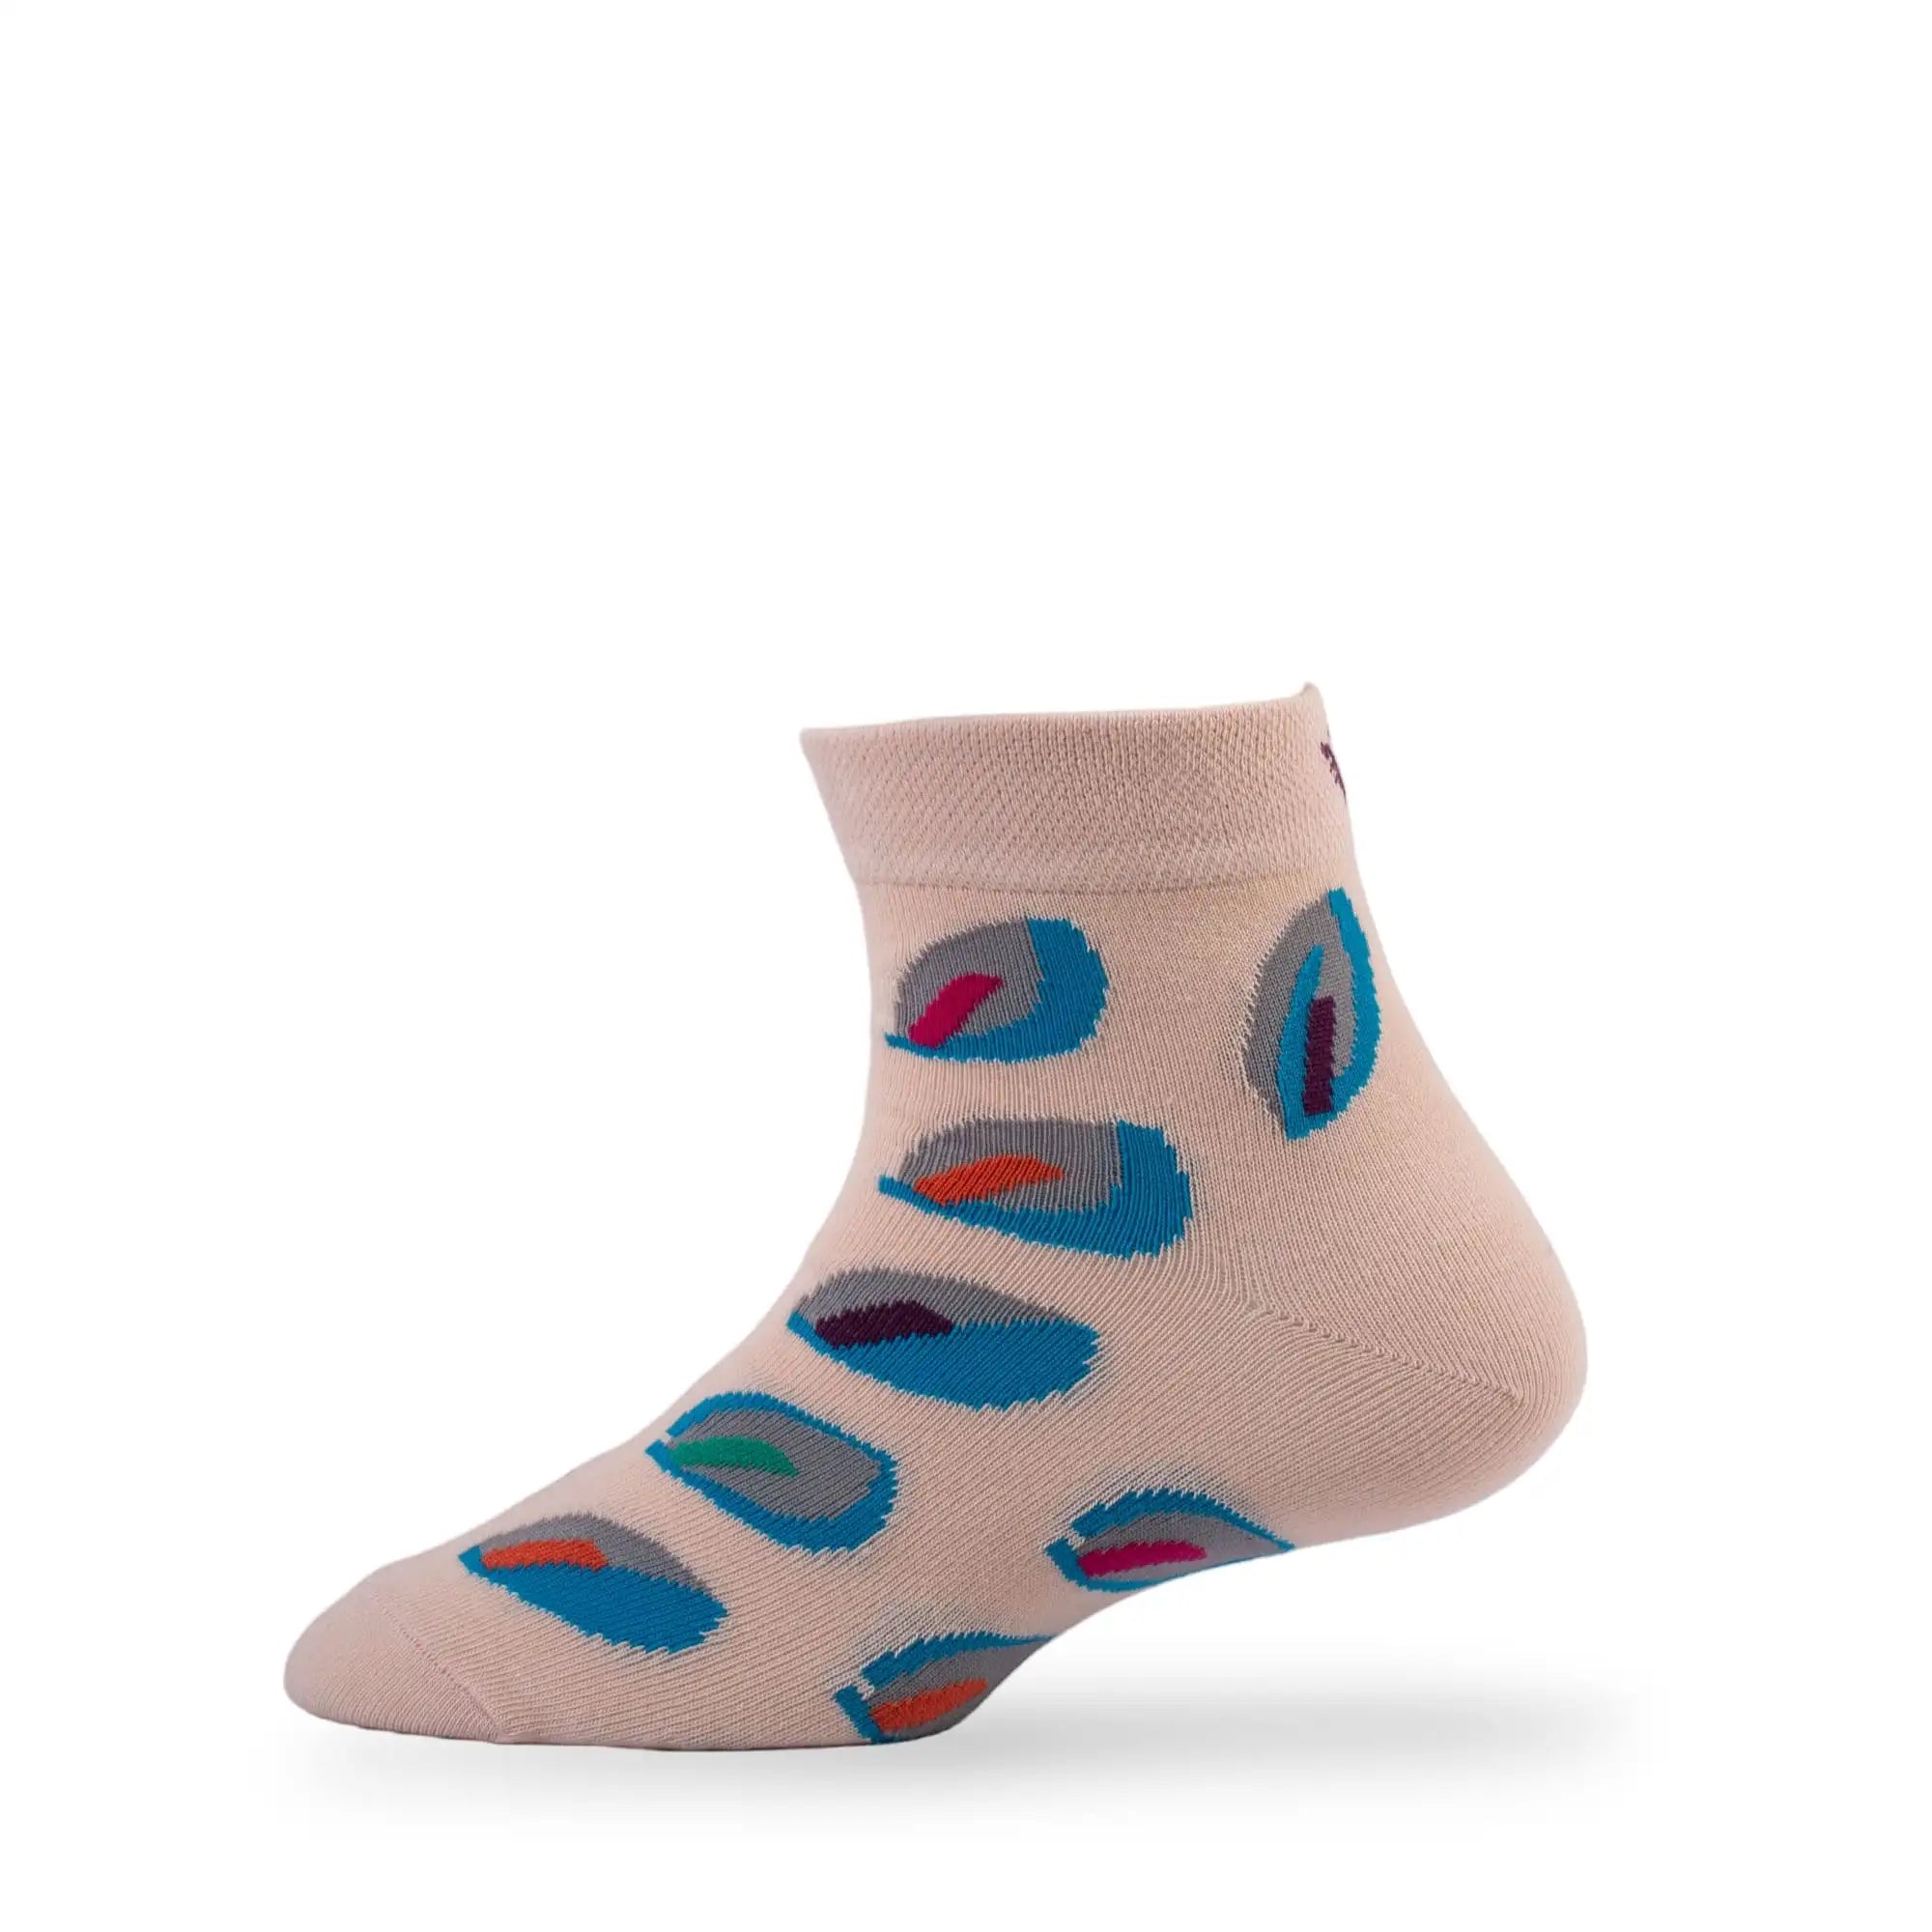 Young Wings Women's Multi Colour Cotton Fabric Solid Ankle Length Socks - Pack of 5, Style no. 5115-W1